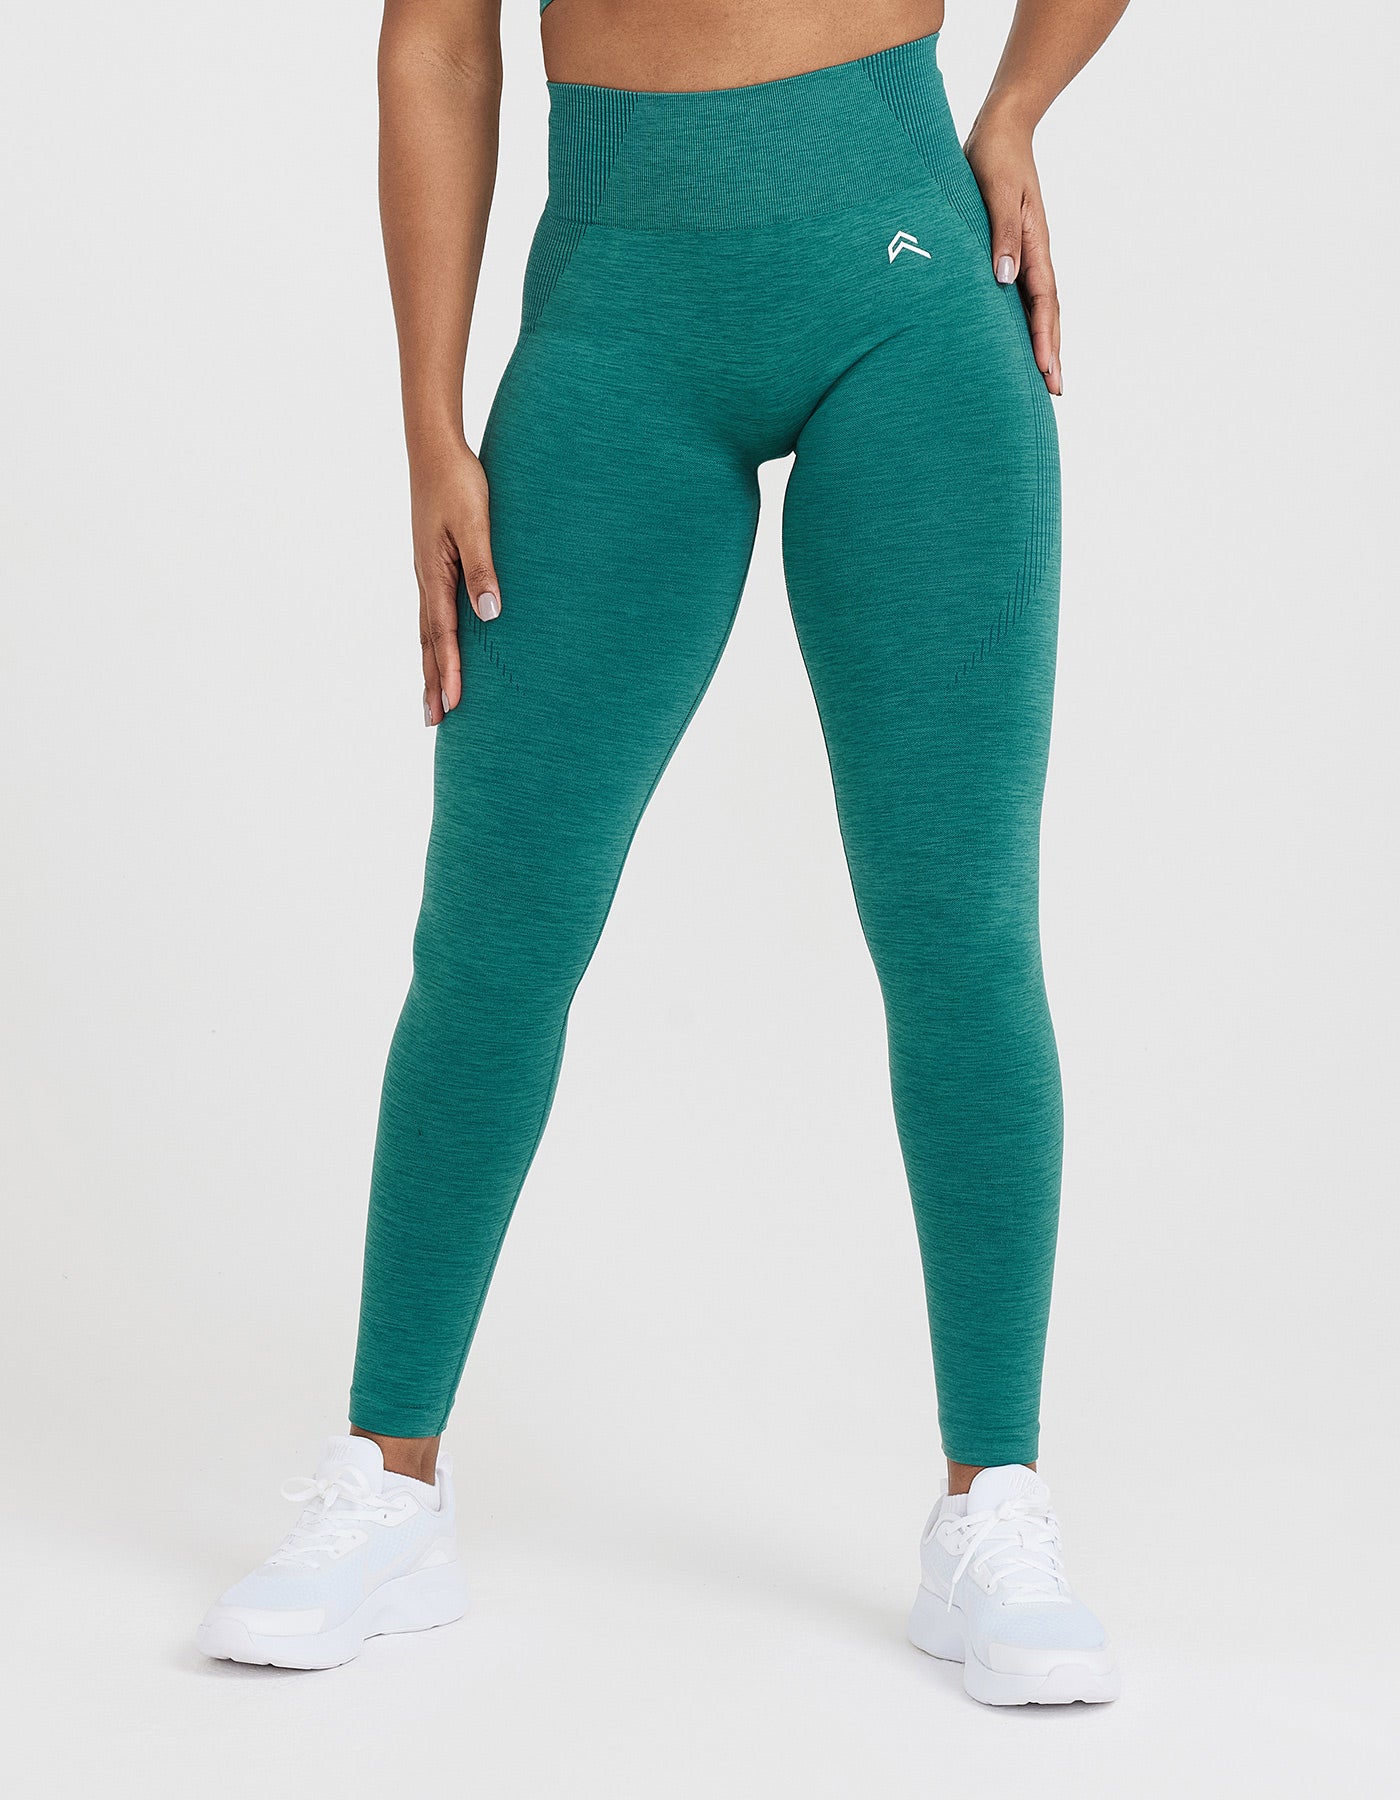 Oner Active - Hello Lagoon! This set is 100% guaranteed to make you feel  extraordinary. We're already thinking of which colours to wear this with  out of existing Classic Seamless colours. Which